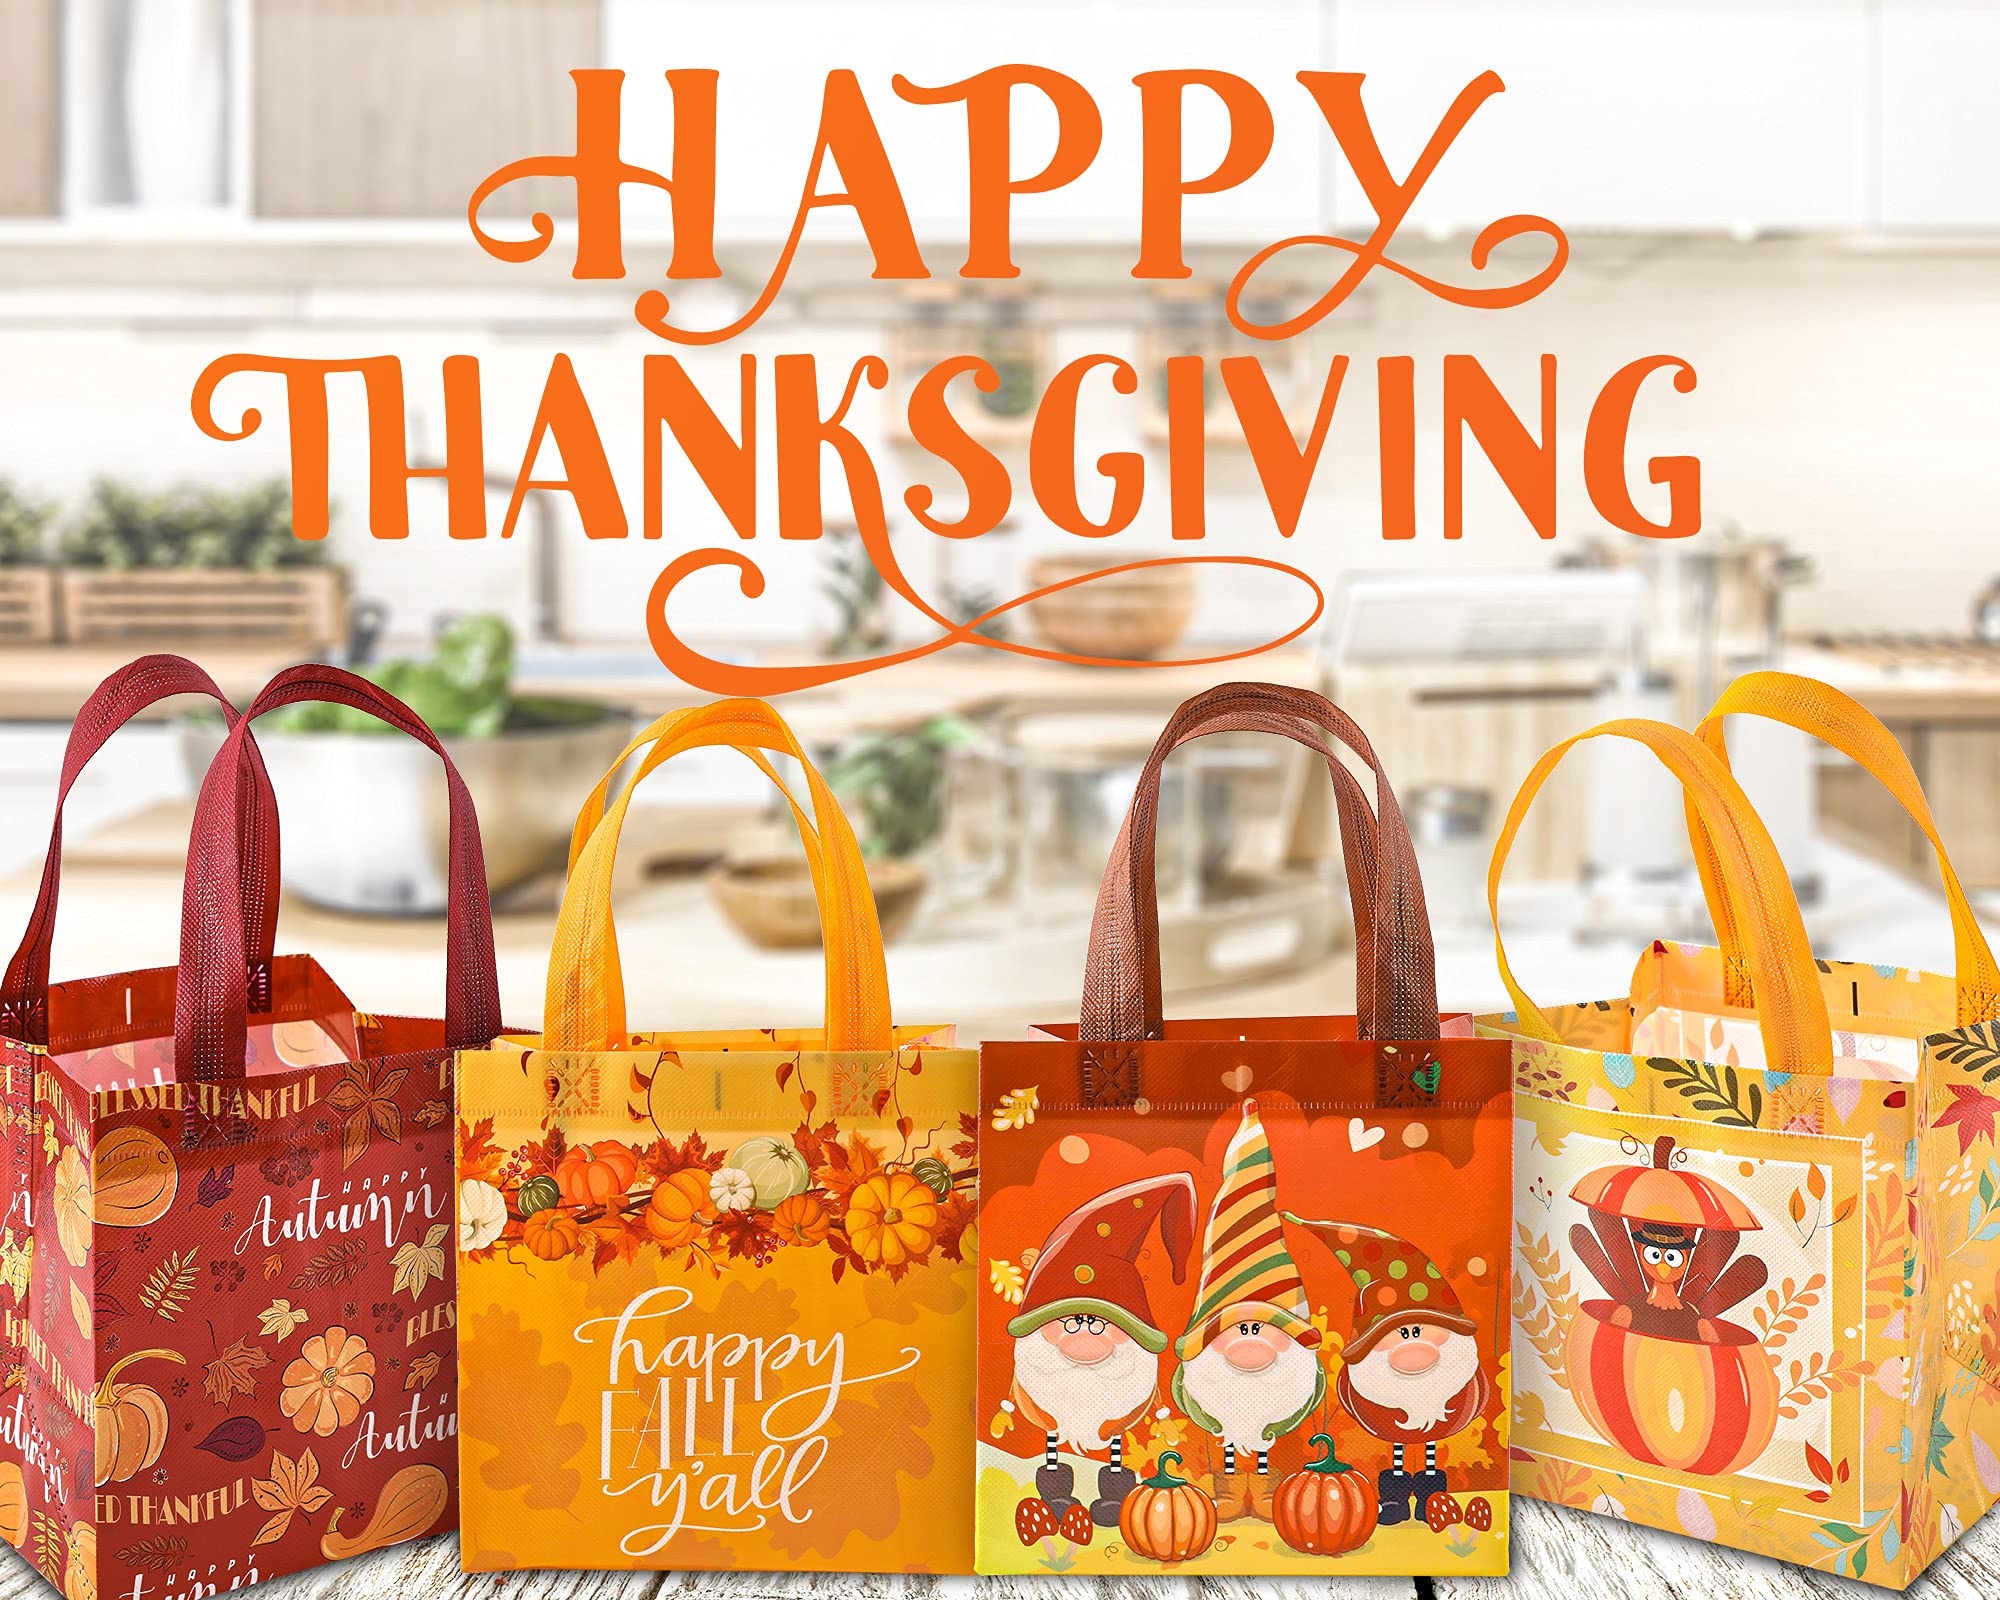 AnyDesign Fall Non-Woven Tote Bags Waterproof Pumpkin Turkey Gnome Party Bags with Handles Reusable Gift Bag Grocery Goodie Shopping Bag Treat Favor Bag for Autumn Thanksgiving Party Supplies, 8 Pack